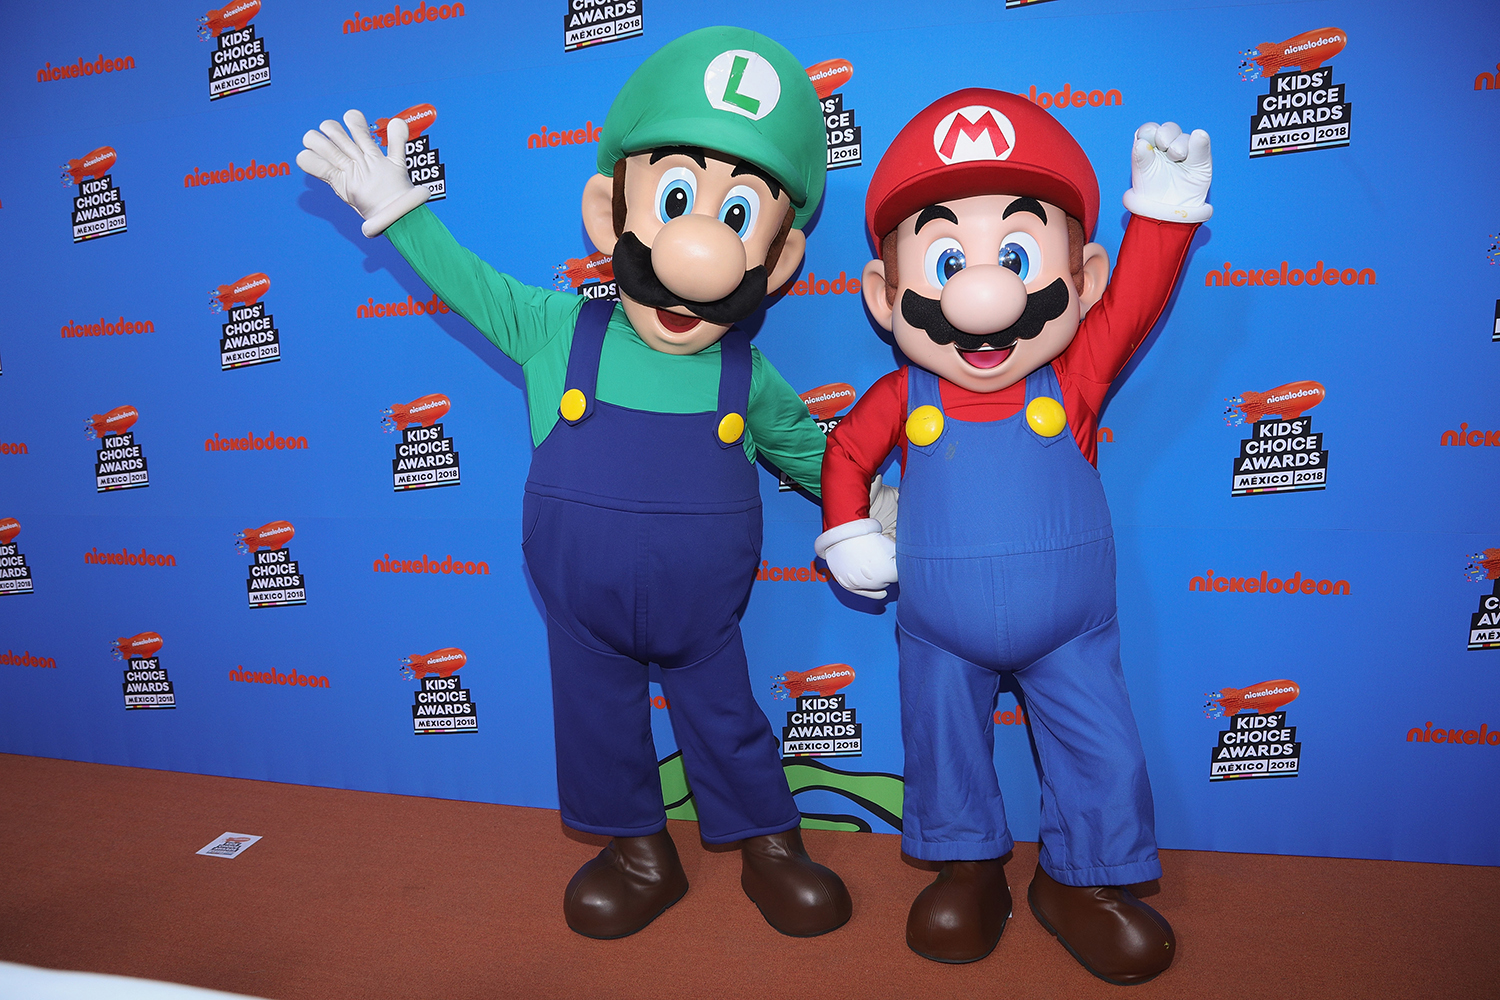 Here's Where & How To Watch 'The Super Mario Bros. Movie' Free